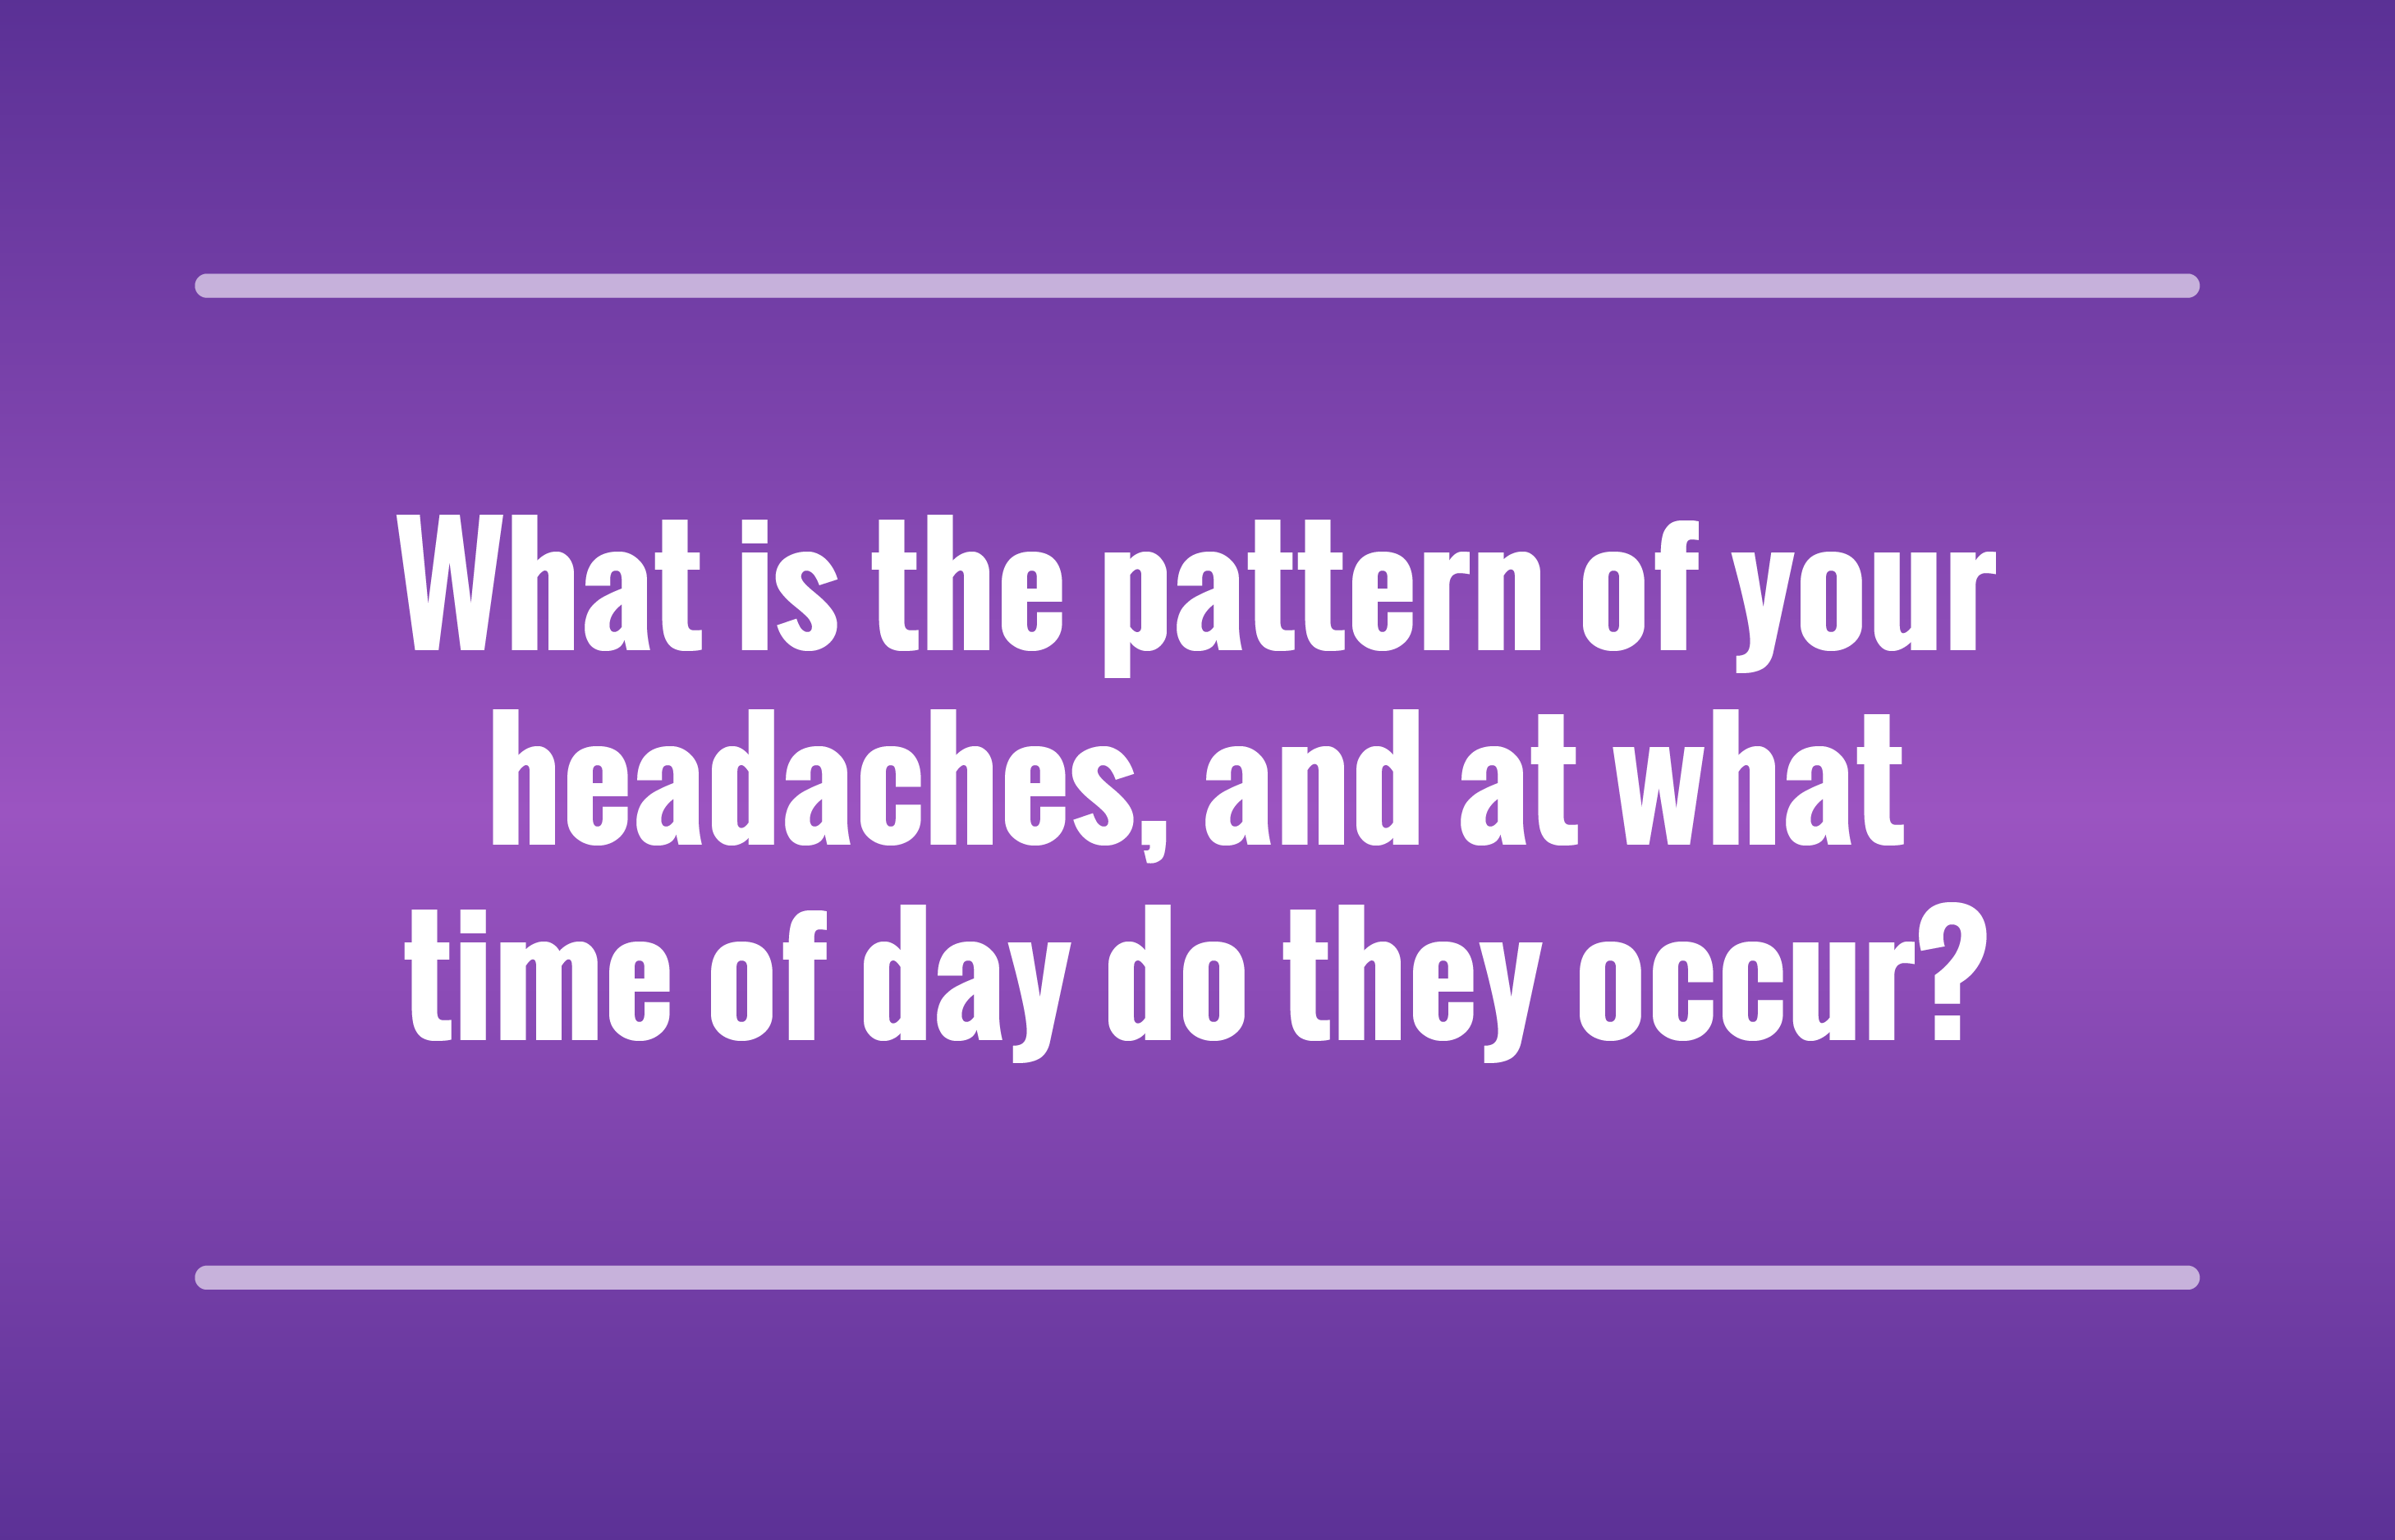 What is the pattern of your headaches, and at what time of day do they occur?